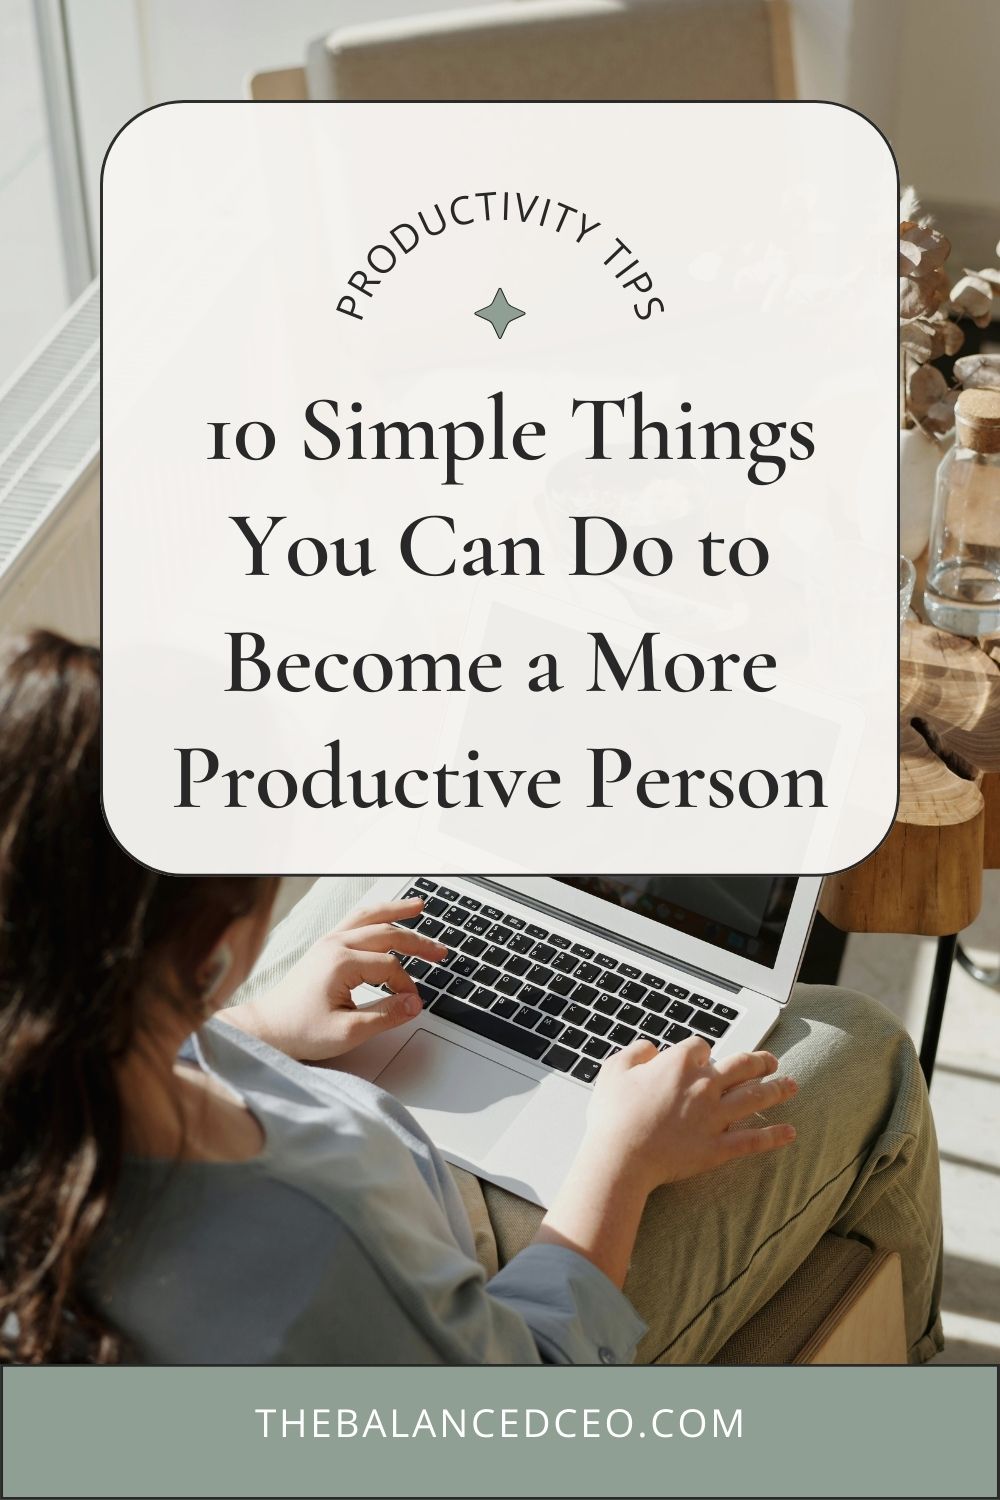 10 Simple Things You Can Do to Become a More Productive Person